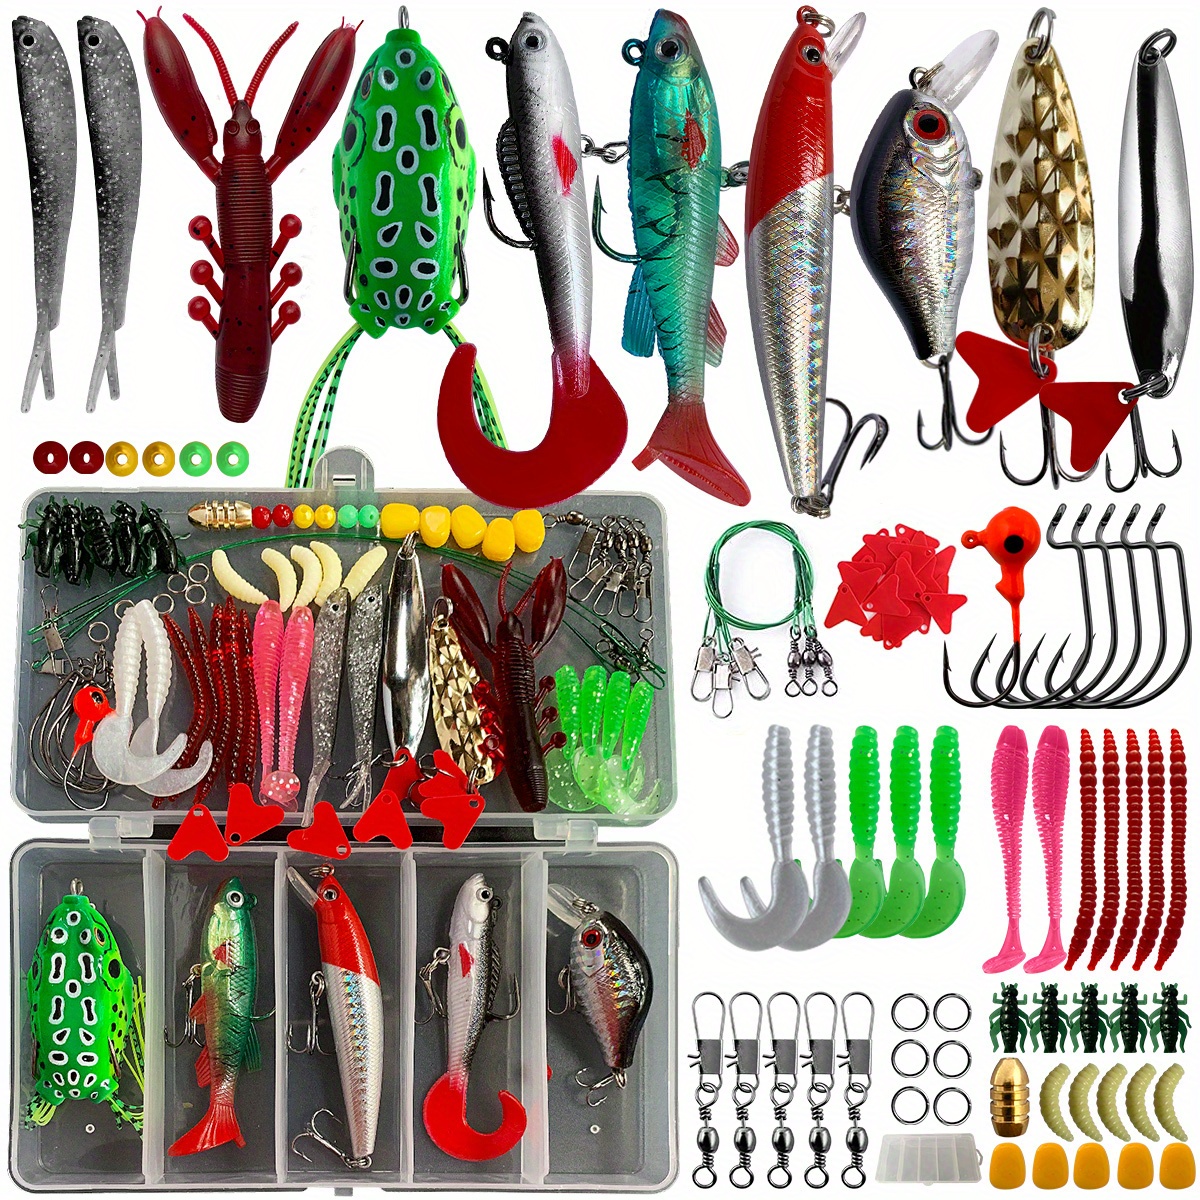 Freshwater Fishing Lures Kit for Bass, Trout, Including Crankbaits